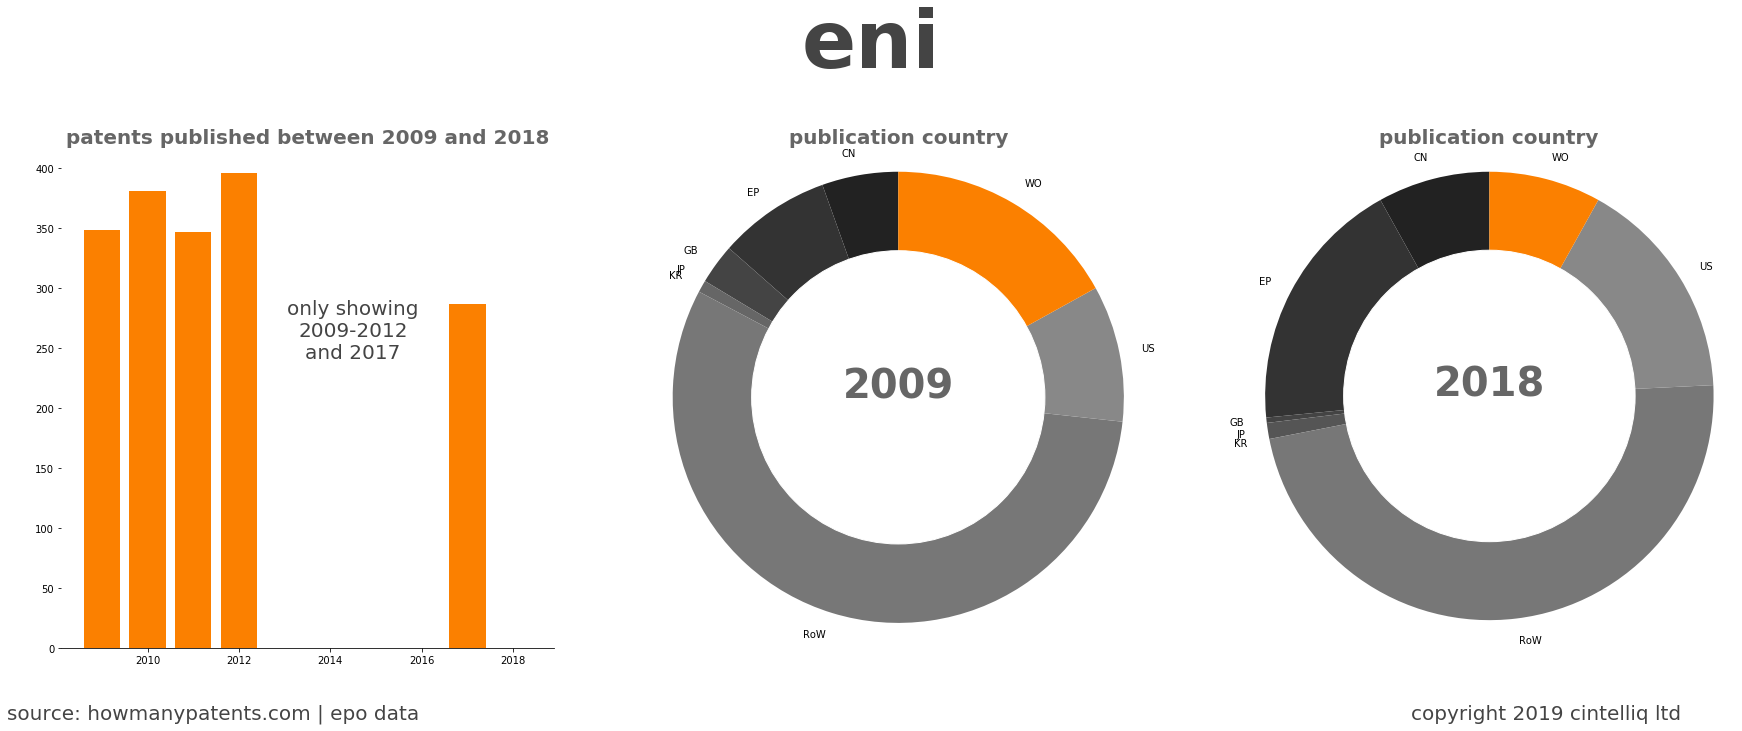 summary of patents for Eni